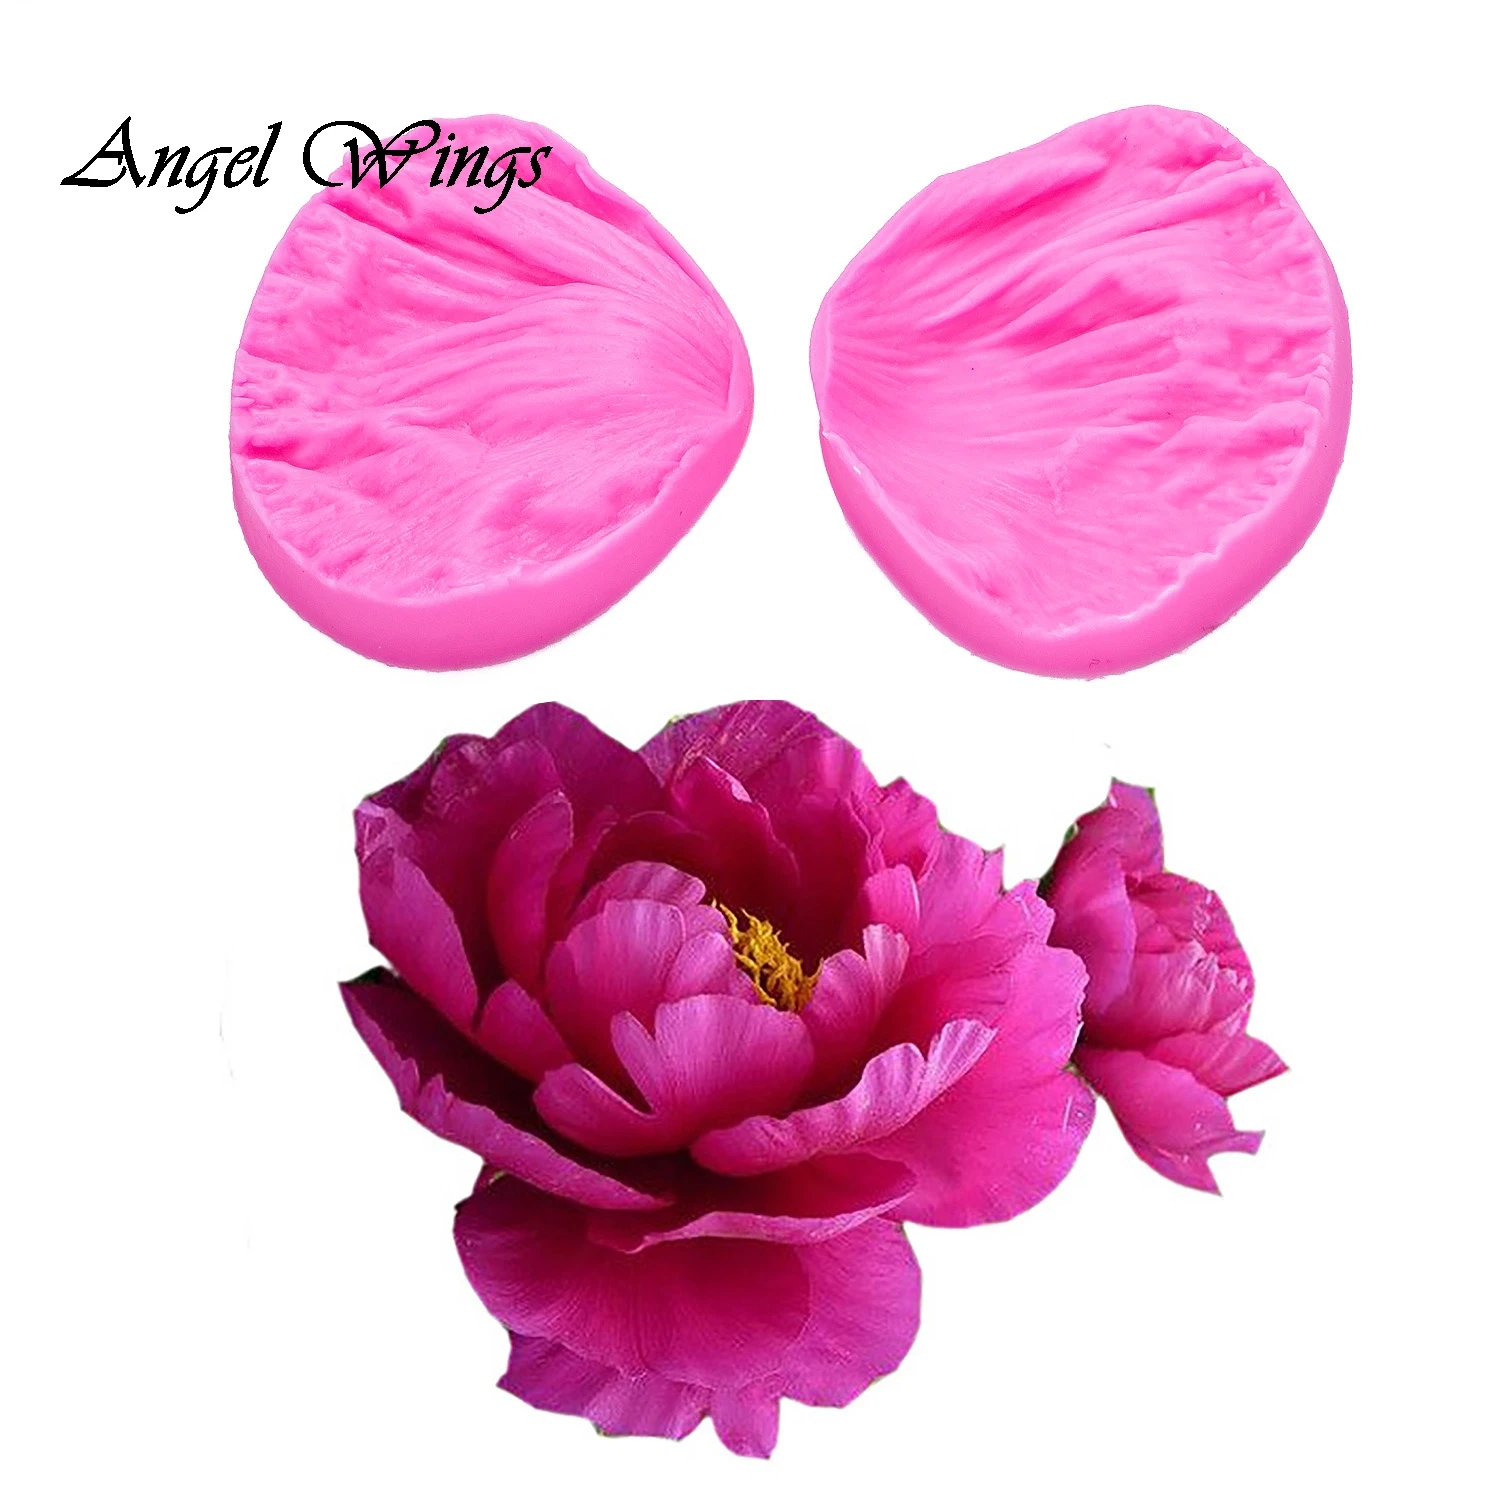 

3D Peony Flower Petals Embossed Silicone Mold Relief Fondant Cake Decorating Tools Chocolate Gumpaste Candy Clay Moulds FT-1028